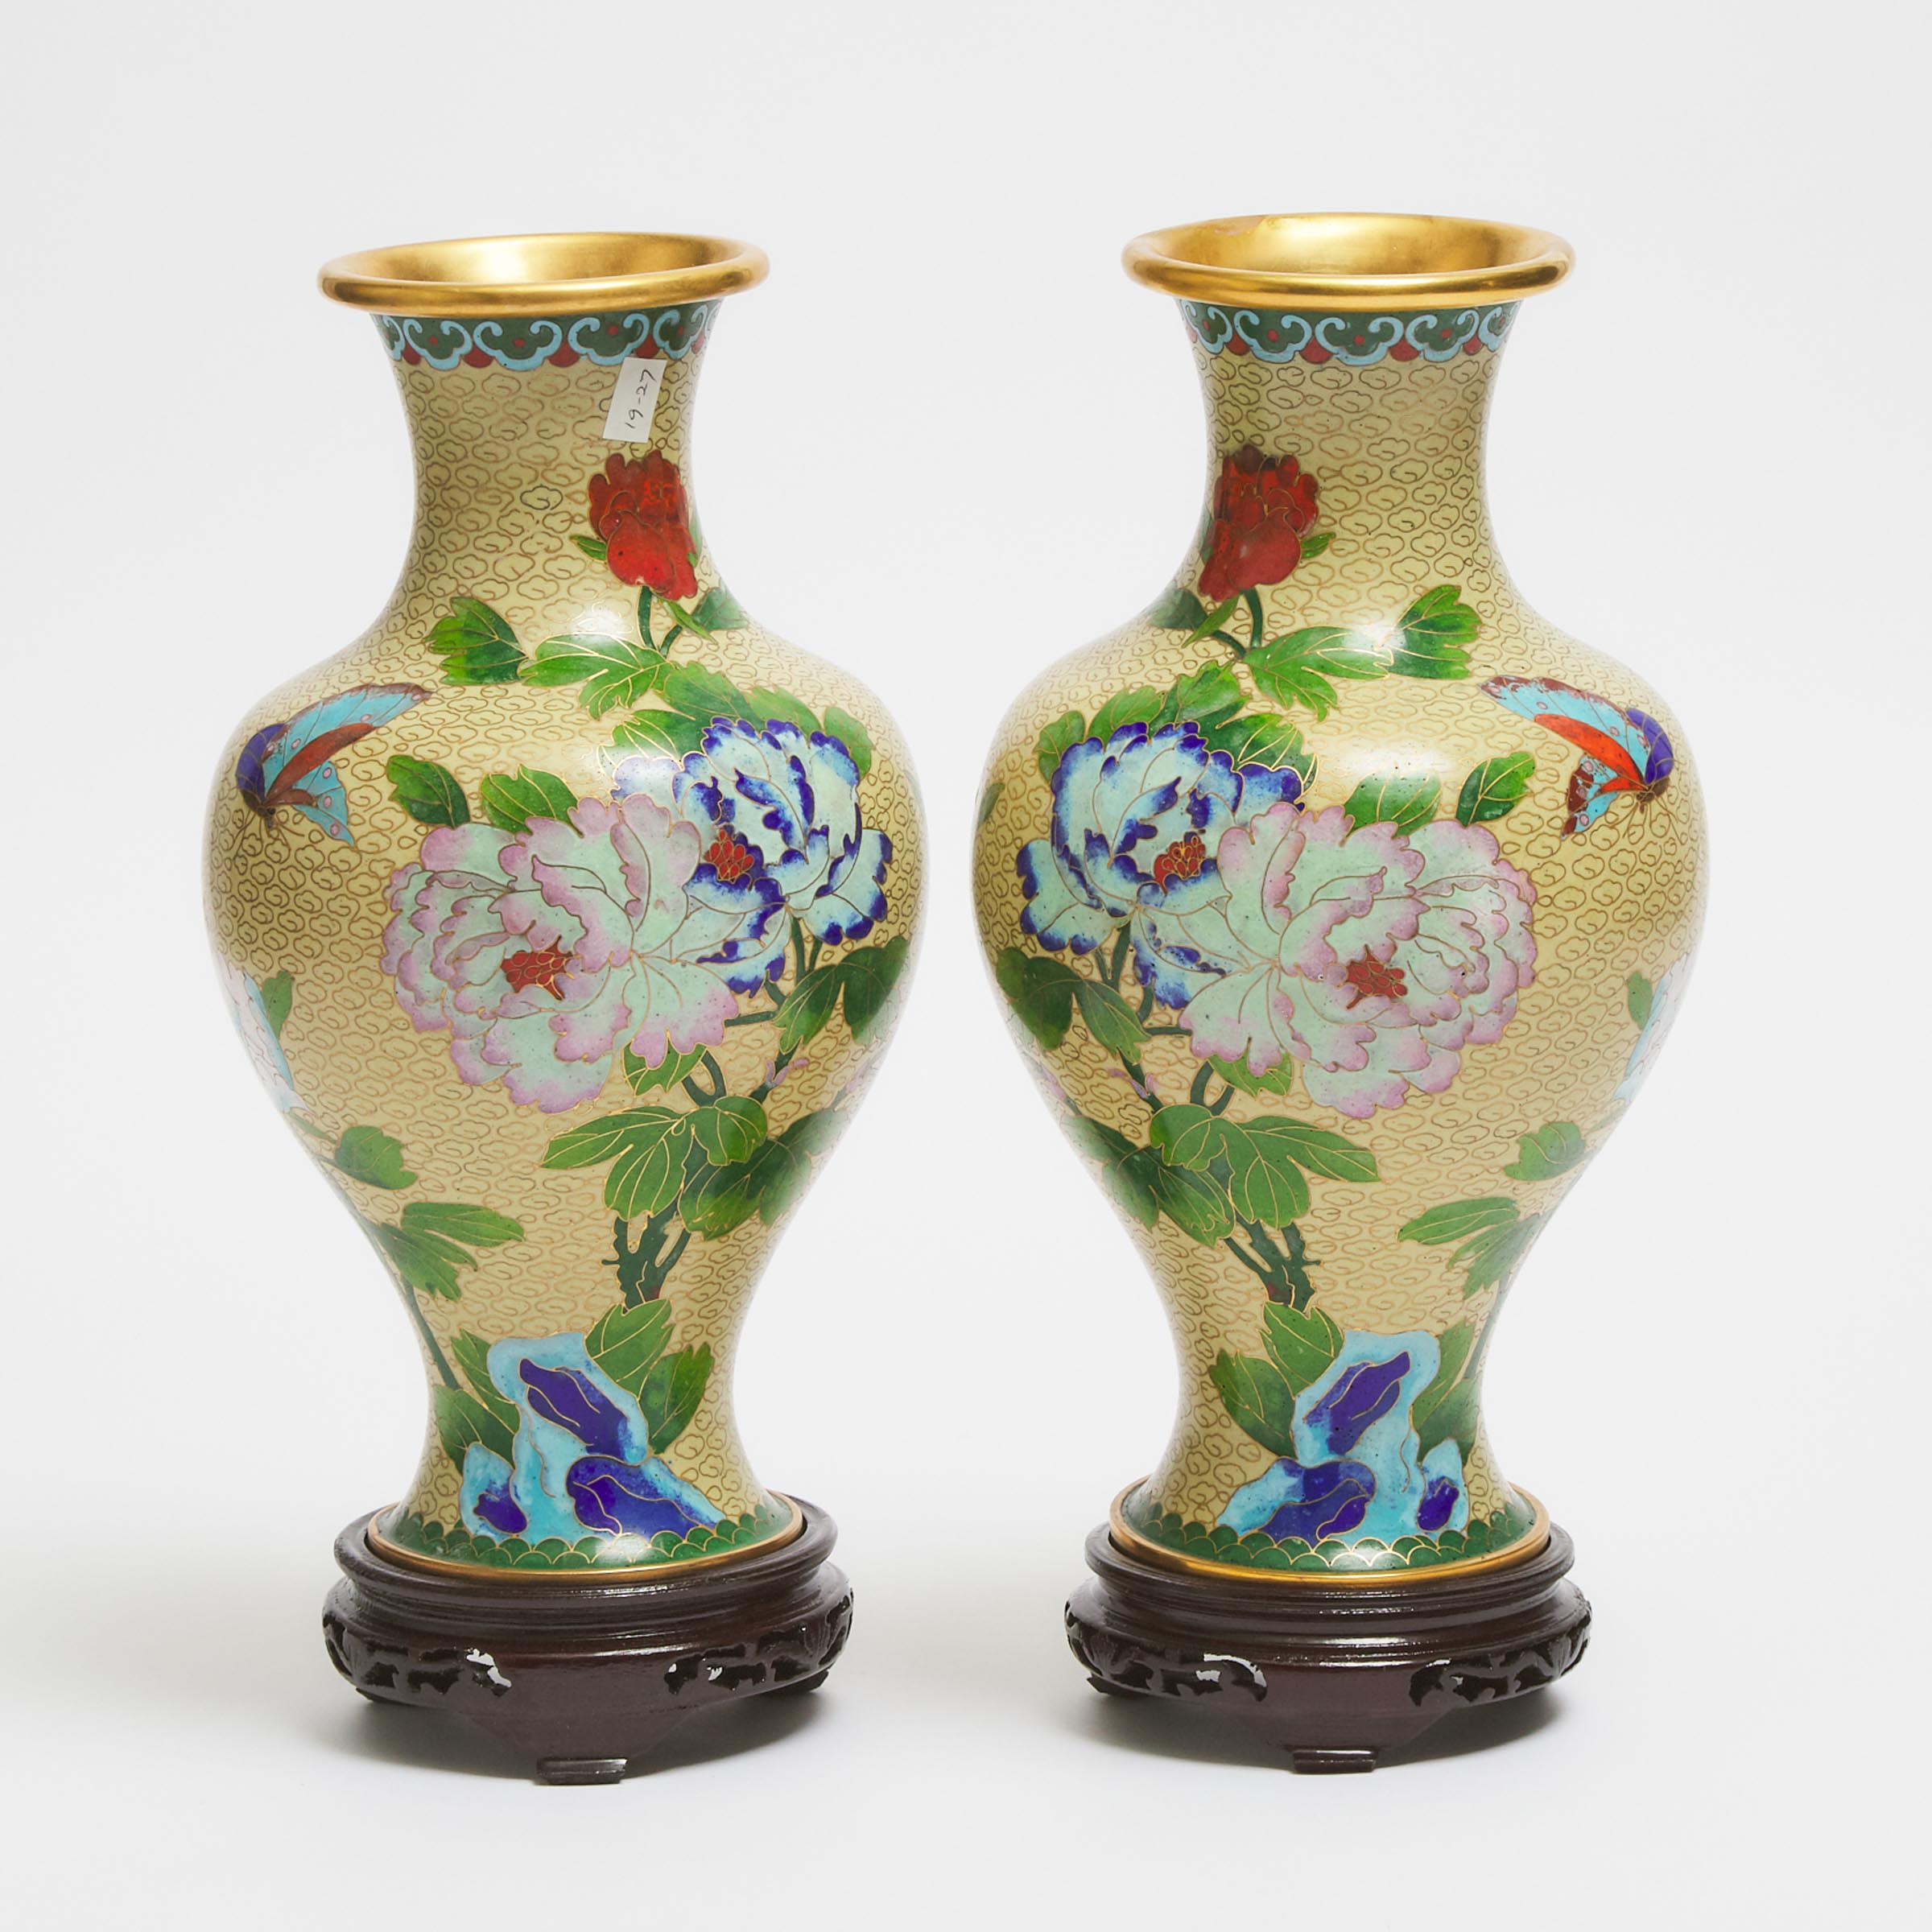 A Pair of Chinese Cloisonné Floral Vases, 20th Century